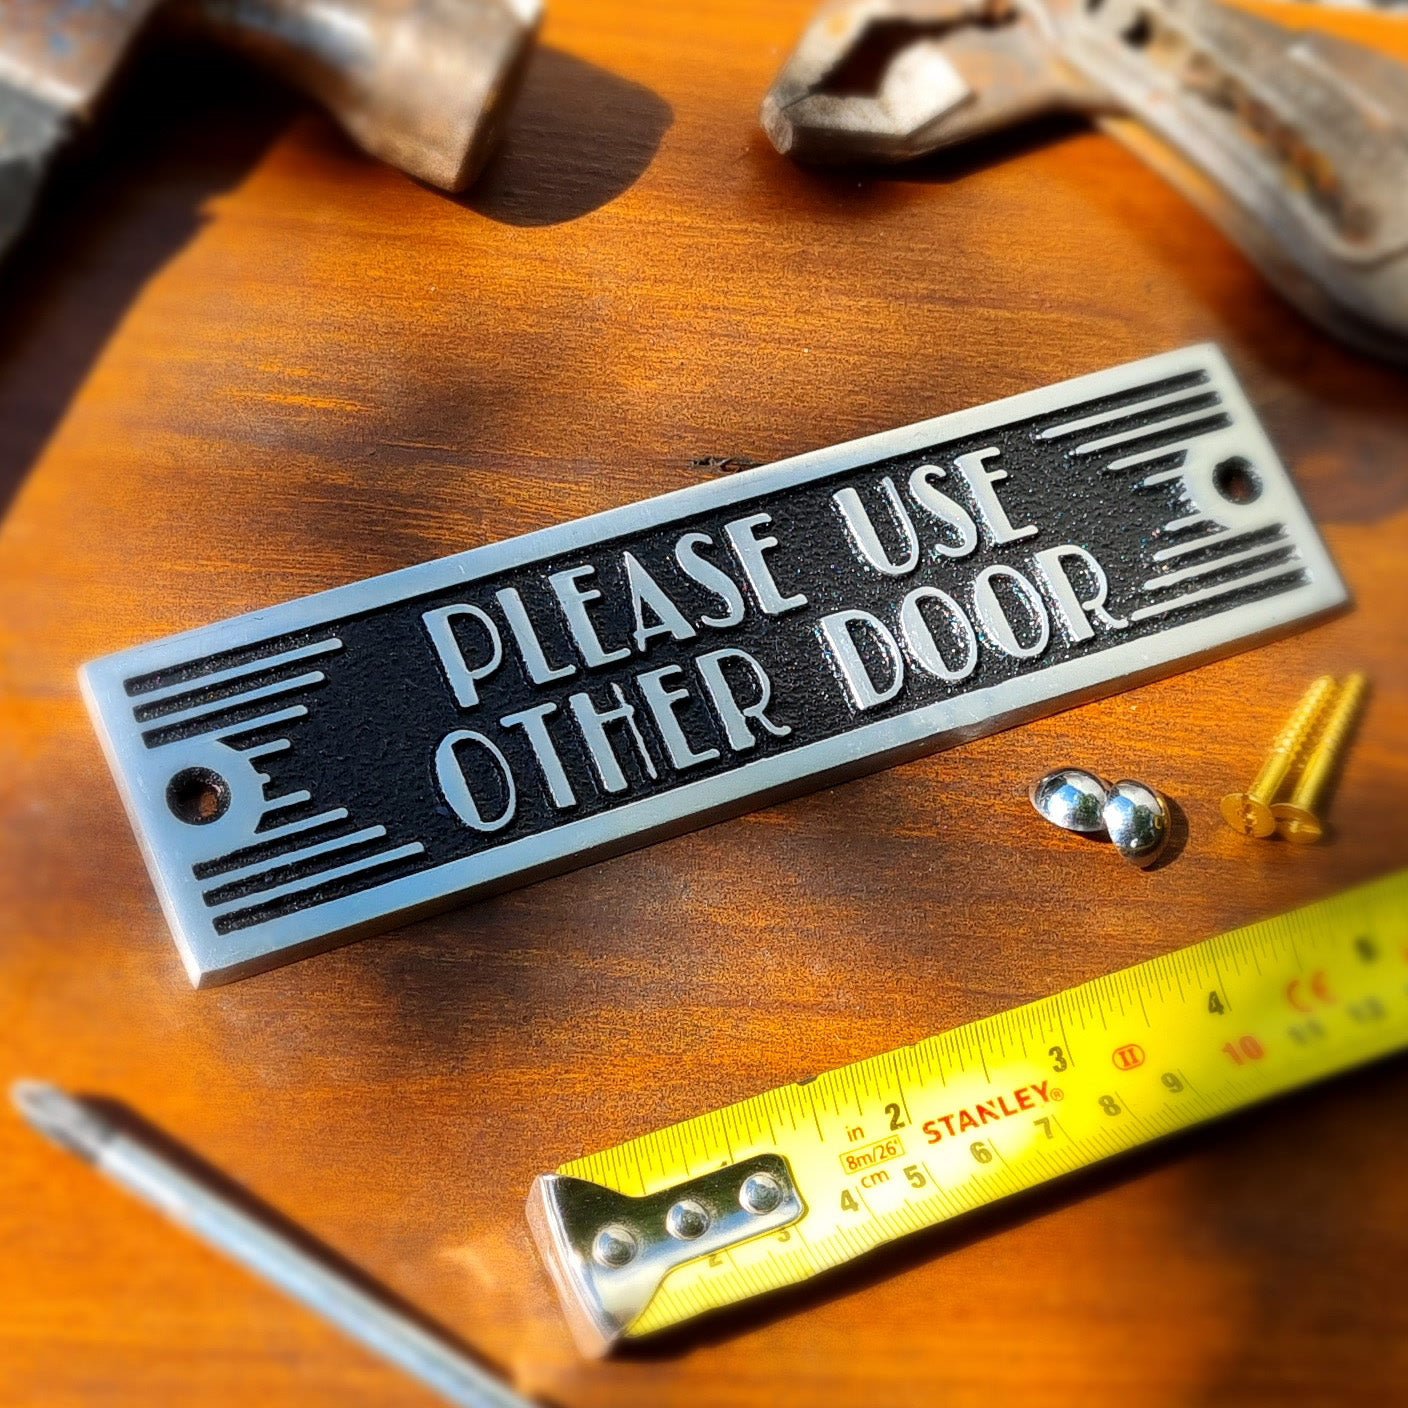 Art Deco 'Please use Other Door' Sign - The Metal Foundry